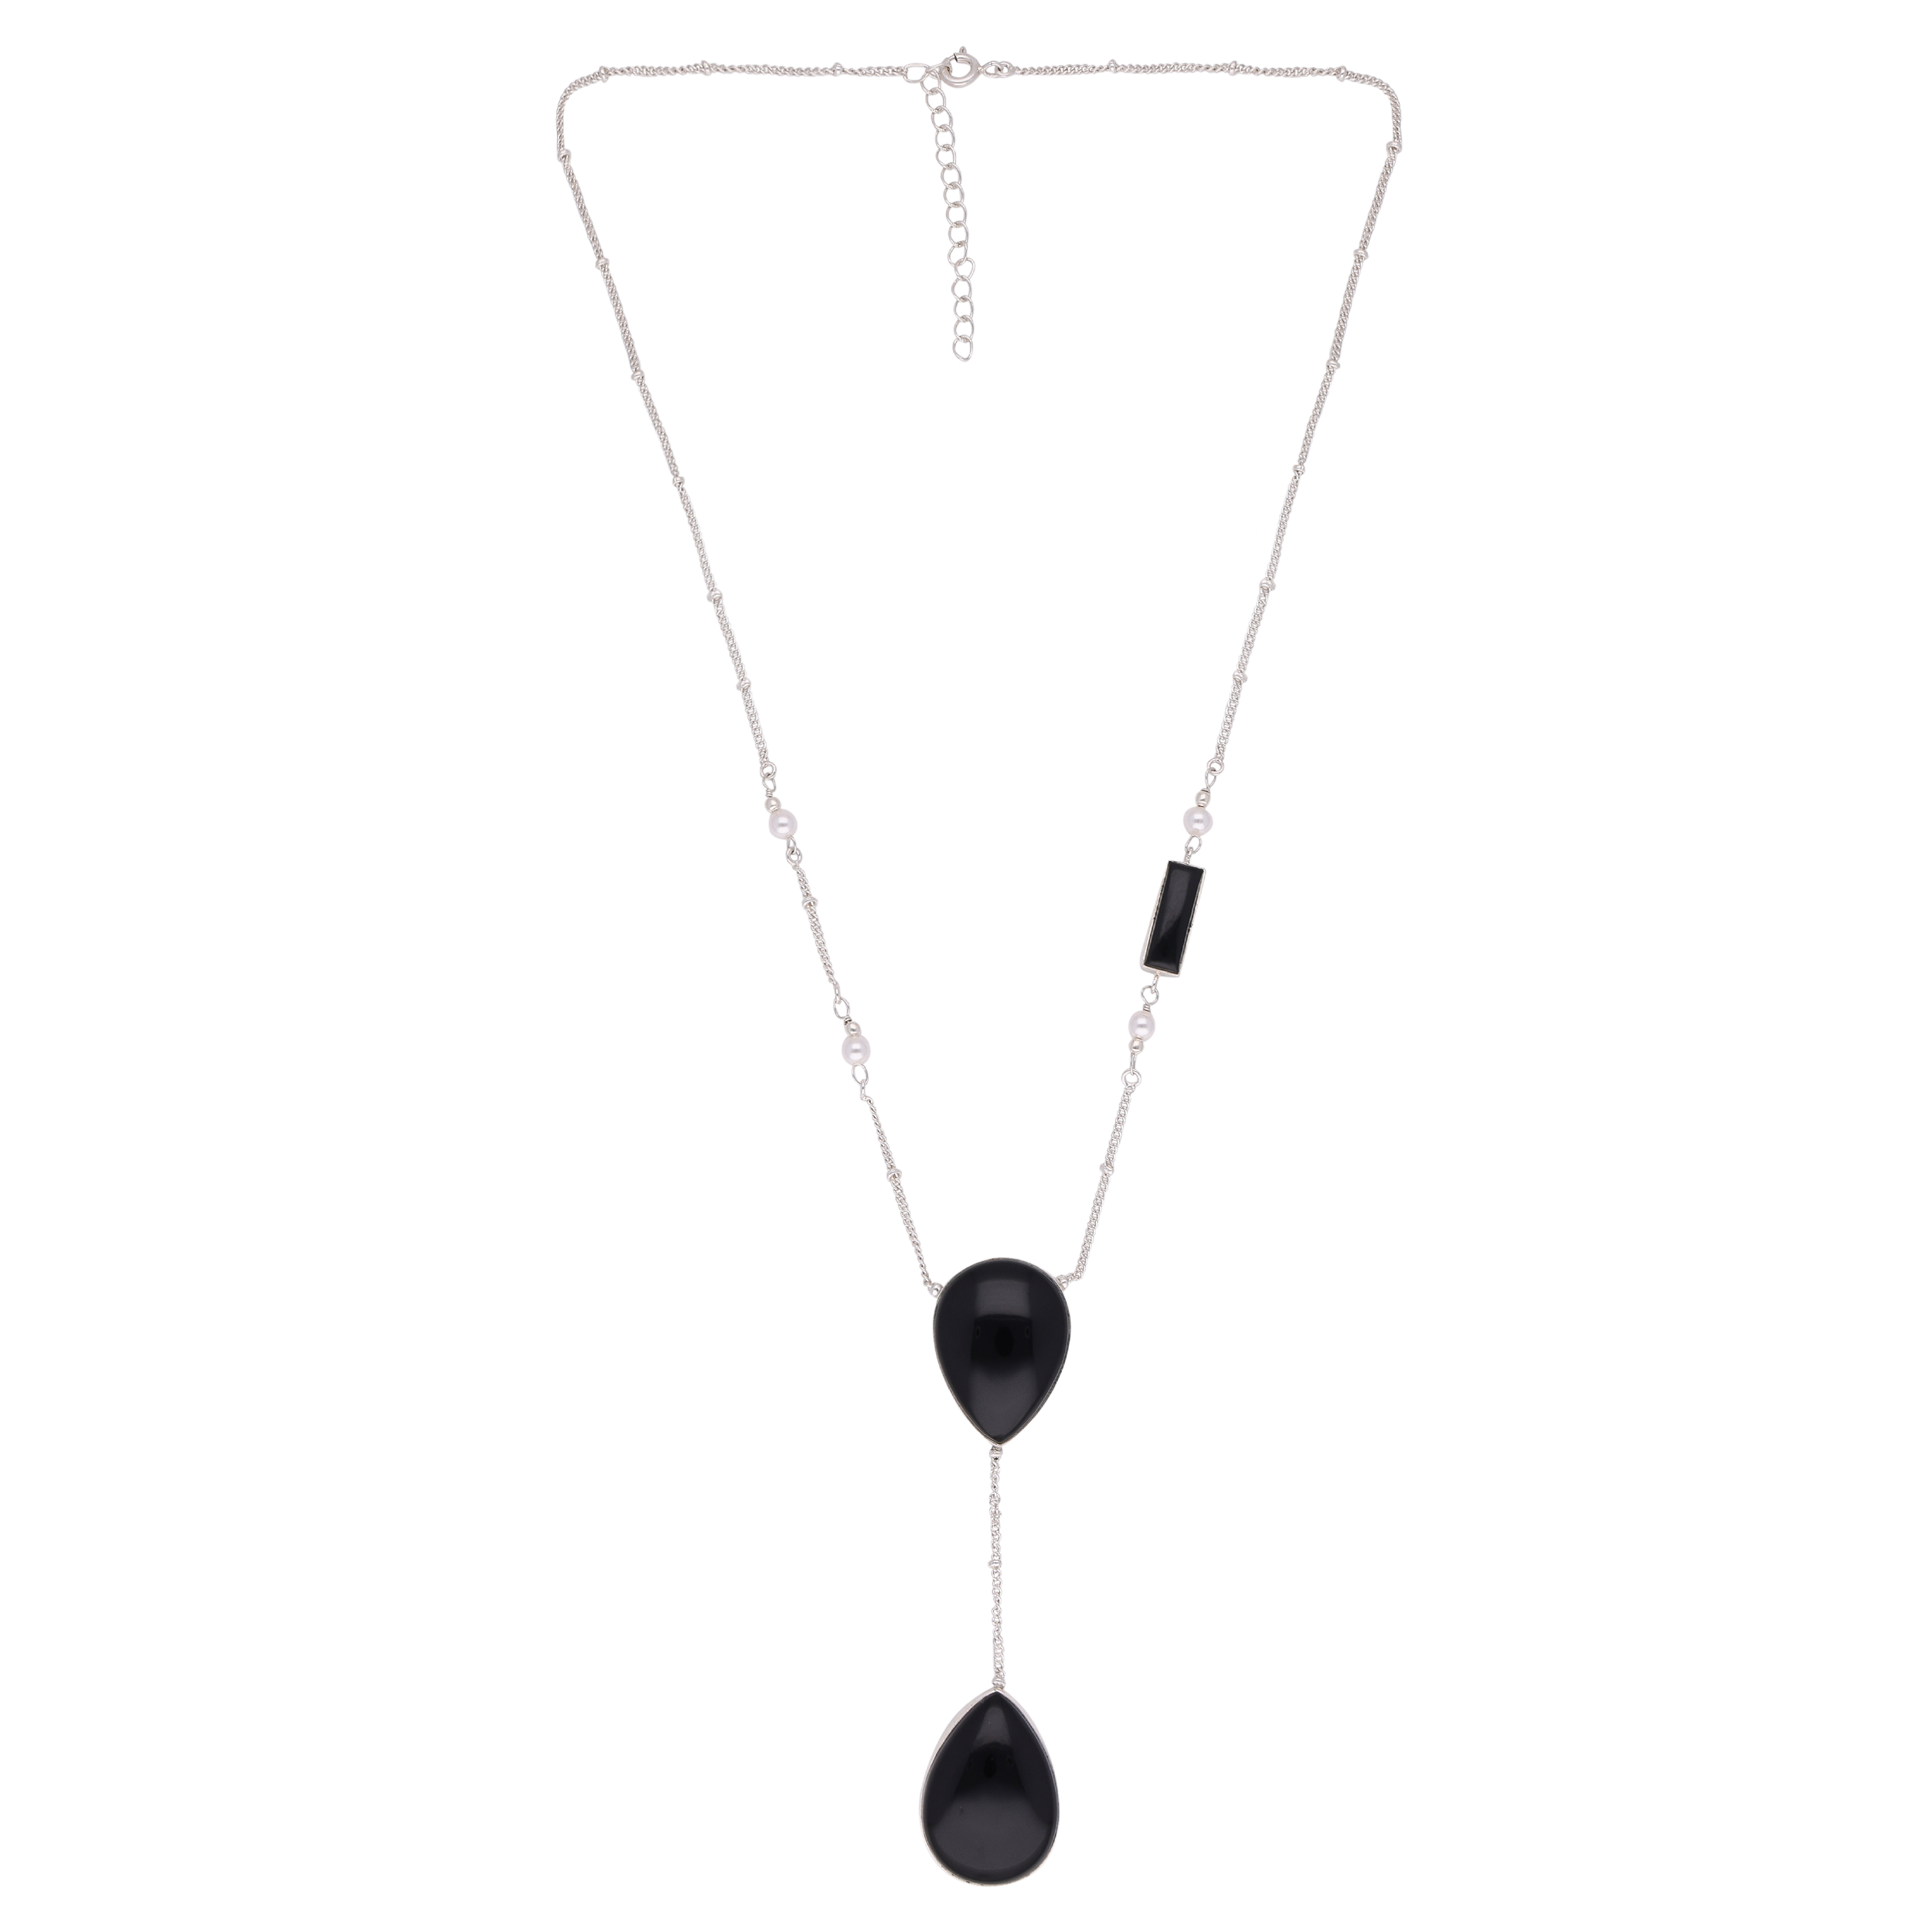 "Sophisticated Onyx Teardrop and Sterling Silver Beaded Necklace | SKU: 0019586106, 0019585970, 0019586069, 0019586083